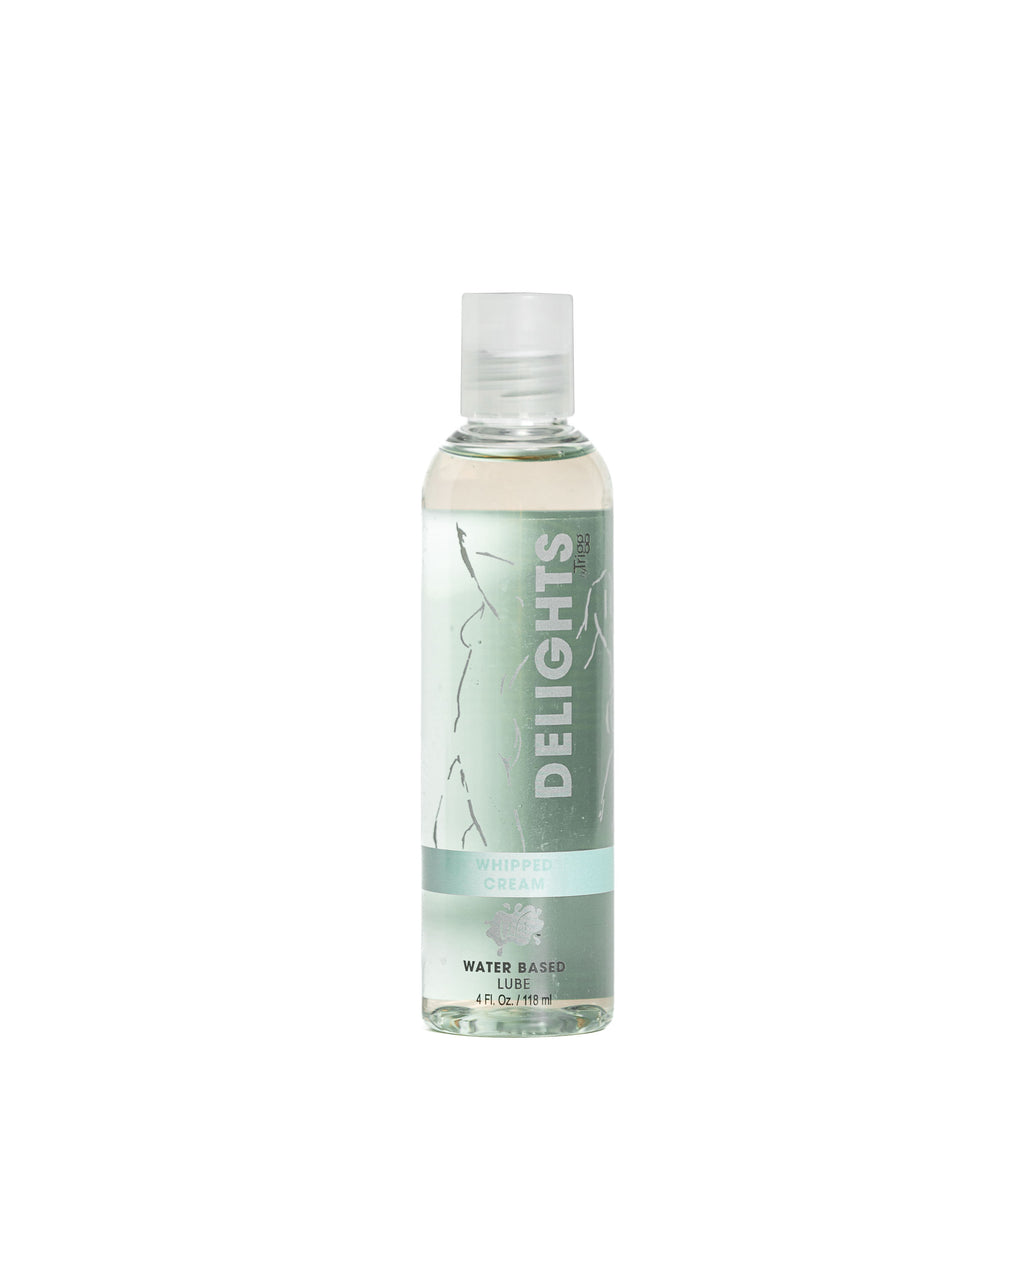 Delight Water Based - Whipped Cream - Flavored Lube 4 Oz WT21569